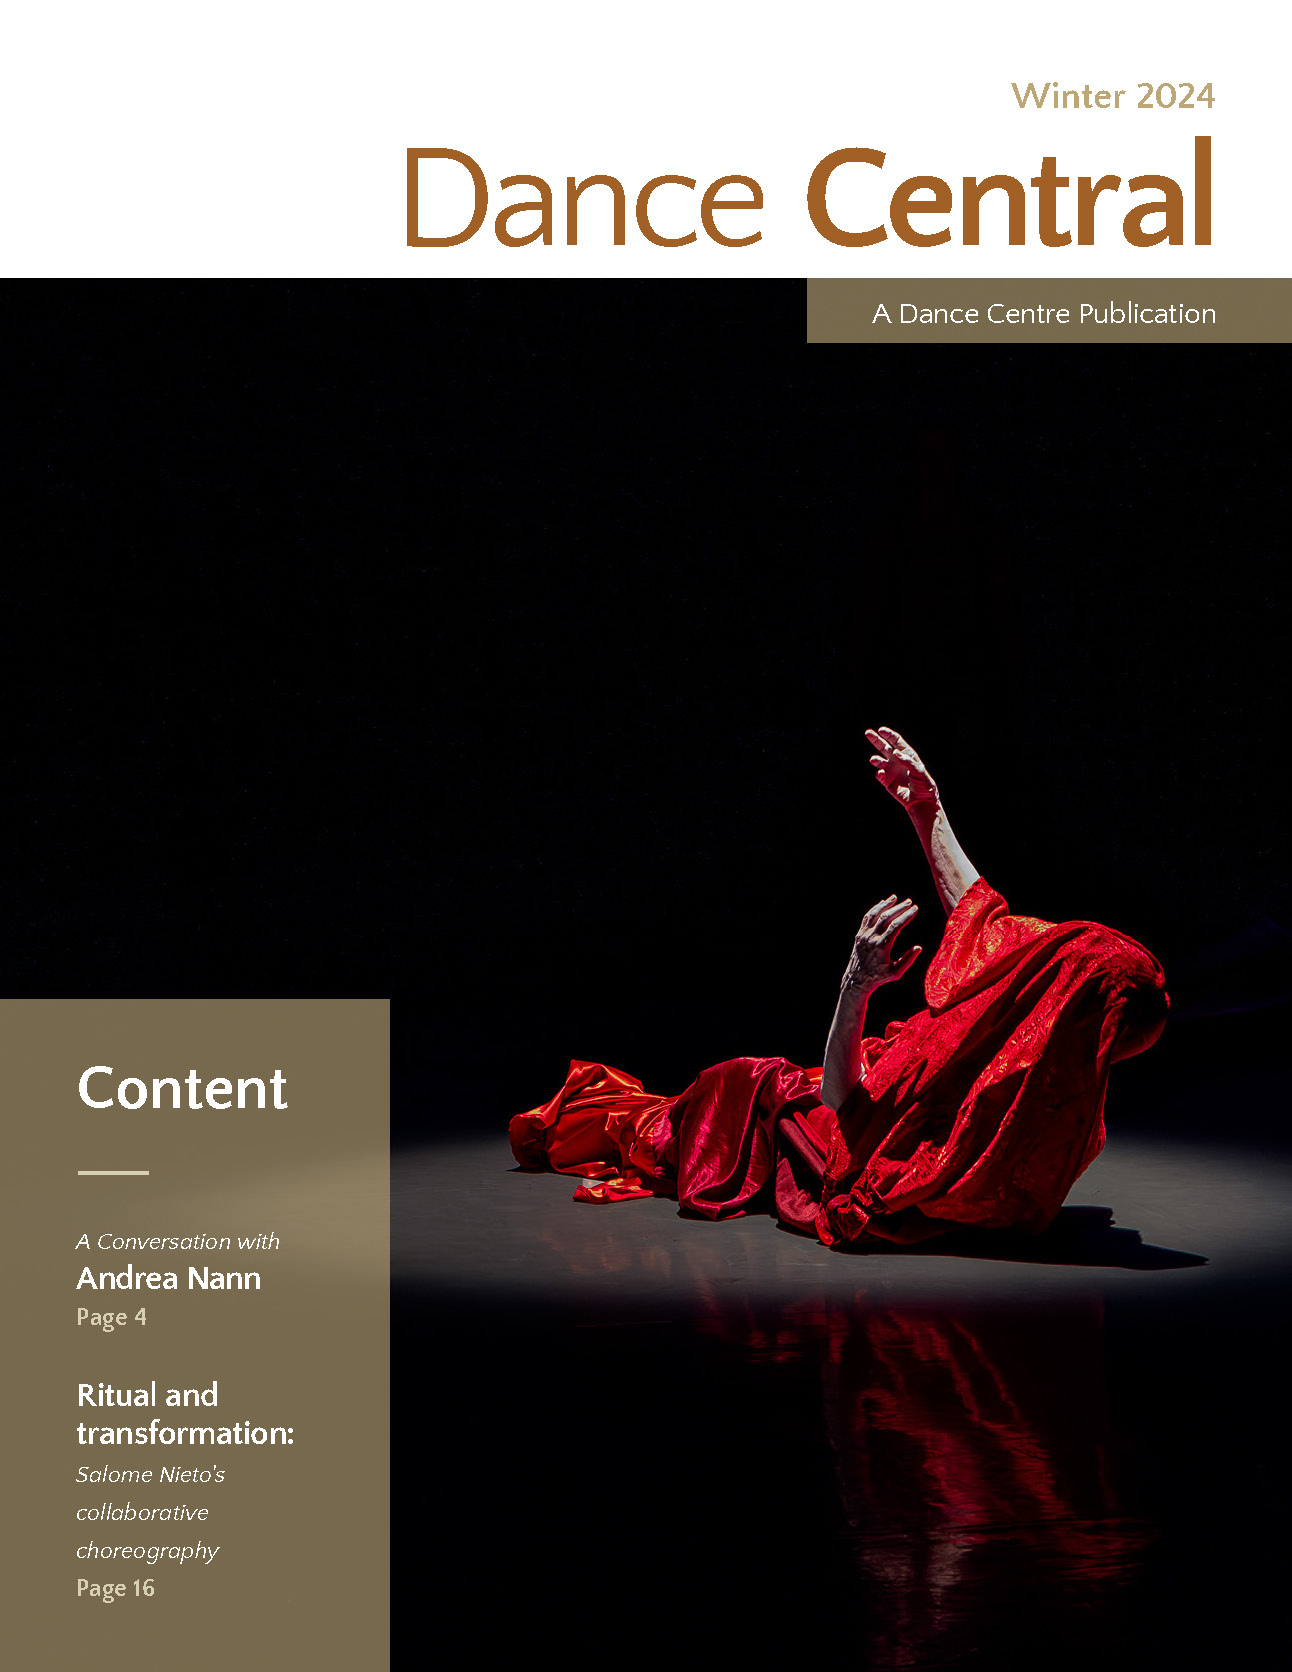 The cover of the Winter 2024 edition of Dance Central: a dance artist lies on a dark floor with red fabric covering their entire body as they reach upwards. There is a text box in the bottom left corner " Content | A Conversation with Andrea Nann Page 4 | Ritual and transformation: Solome Nieto's collaborative choreography Page 16